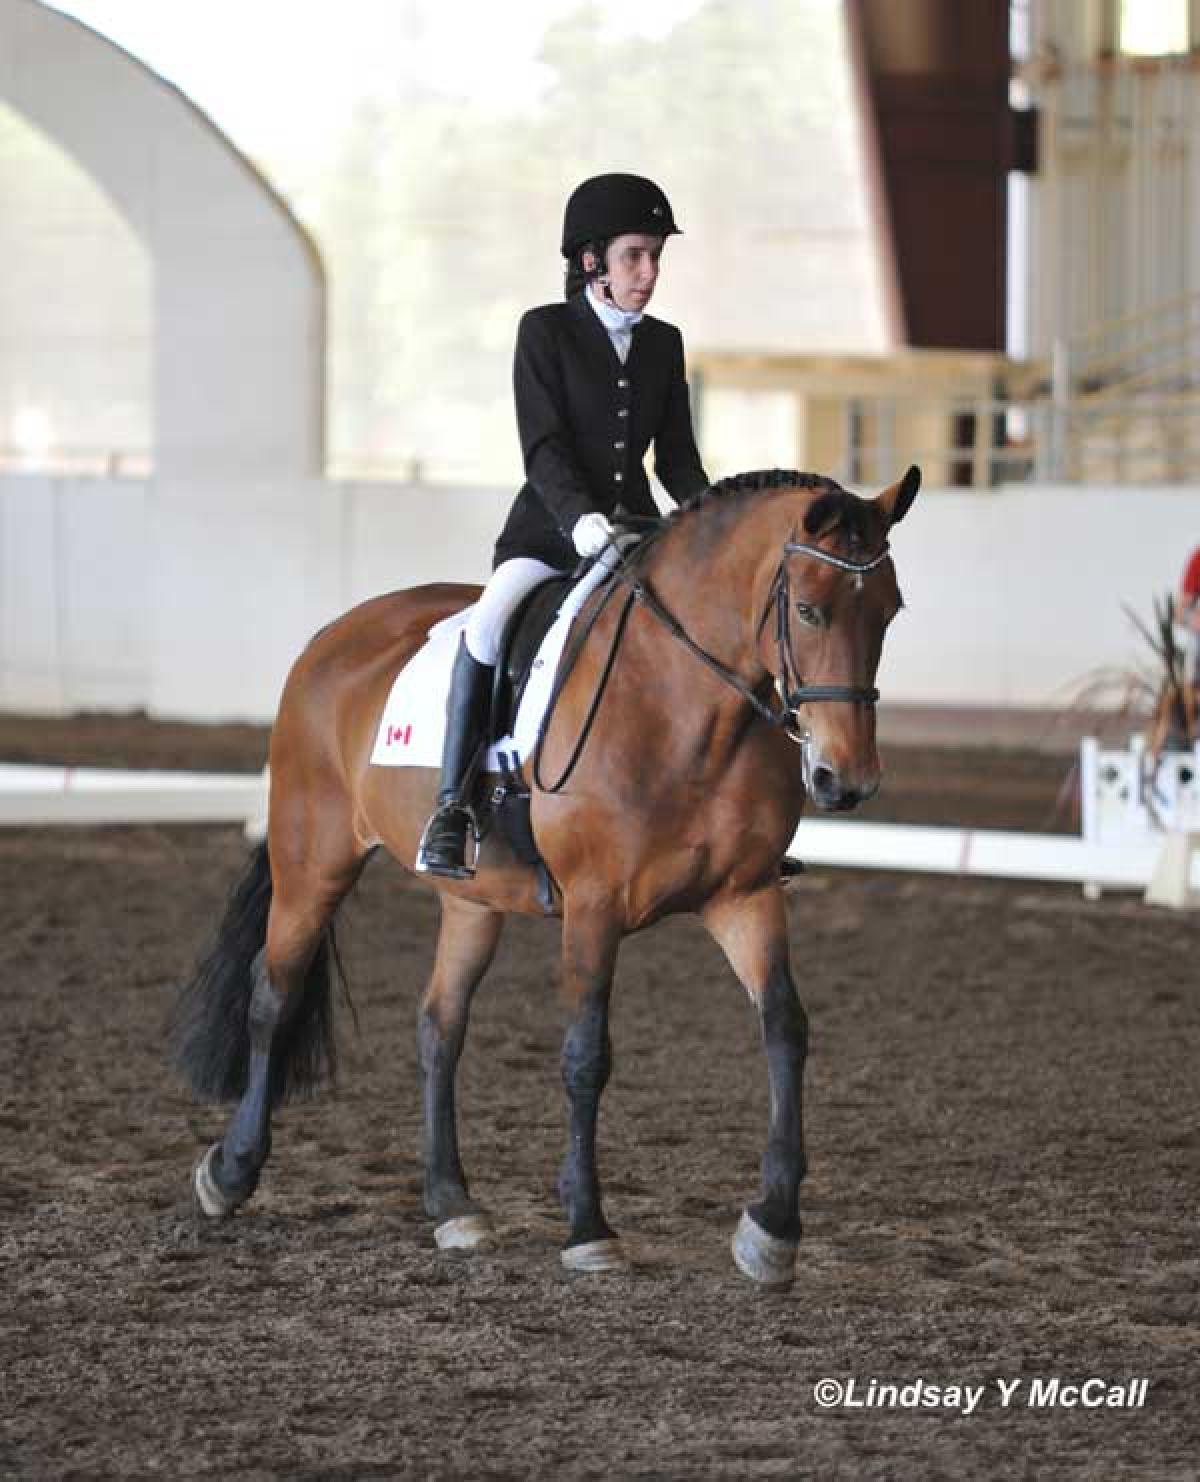 Canadian rider Robyn Andrews on her horse called Fancianna